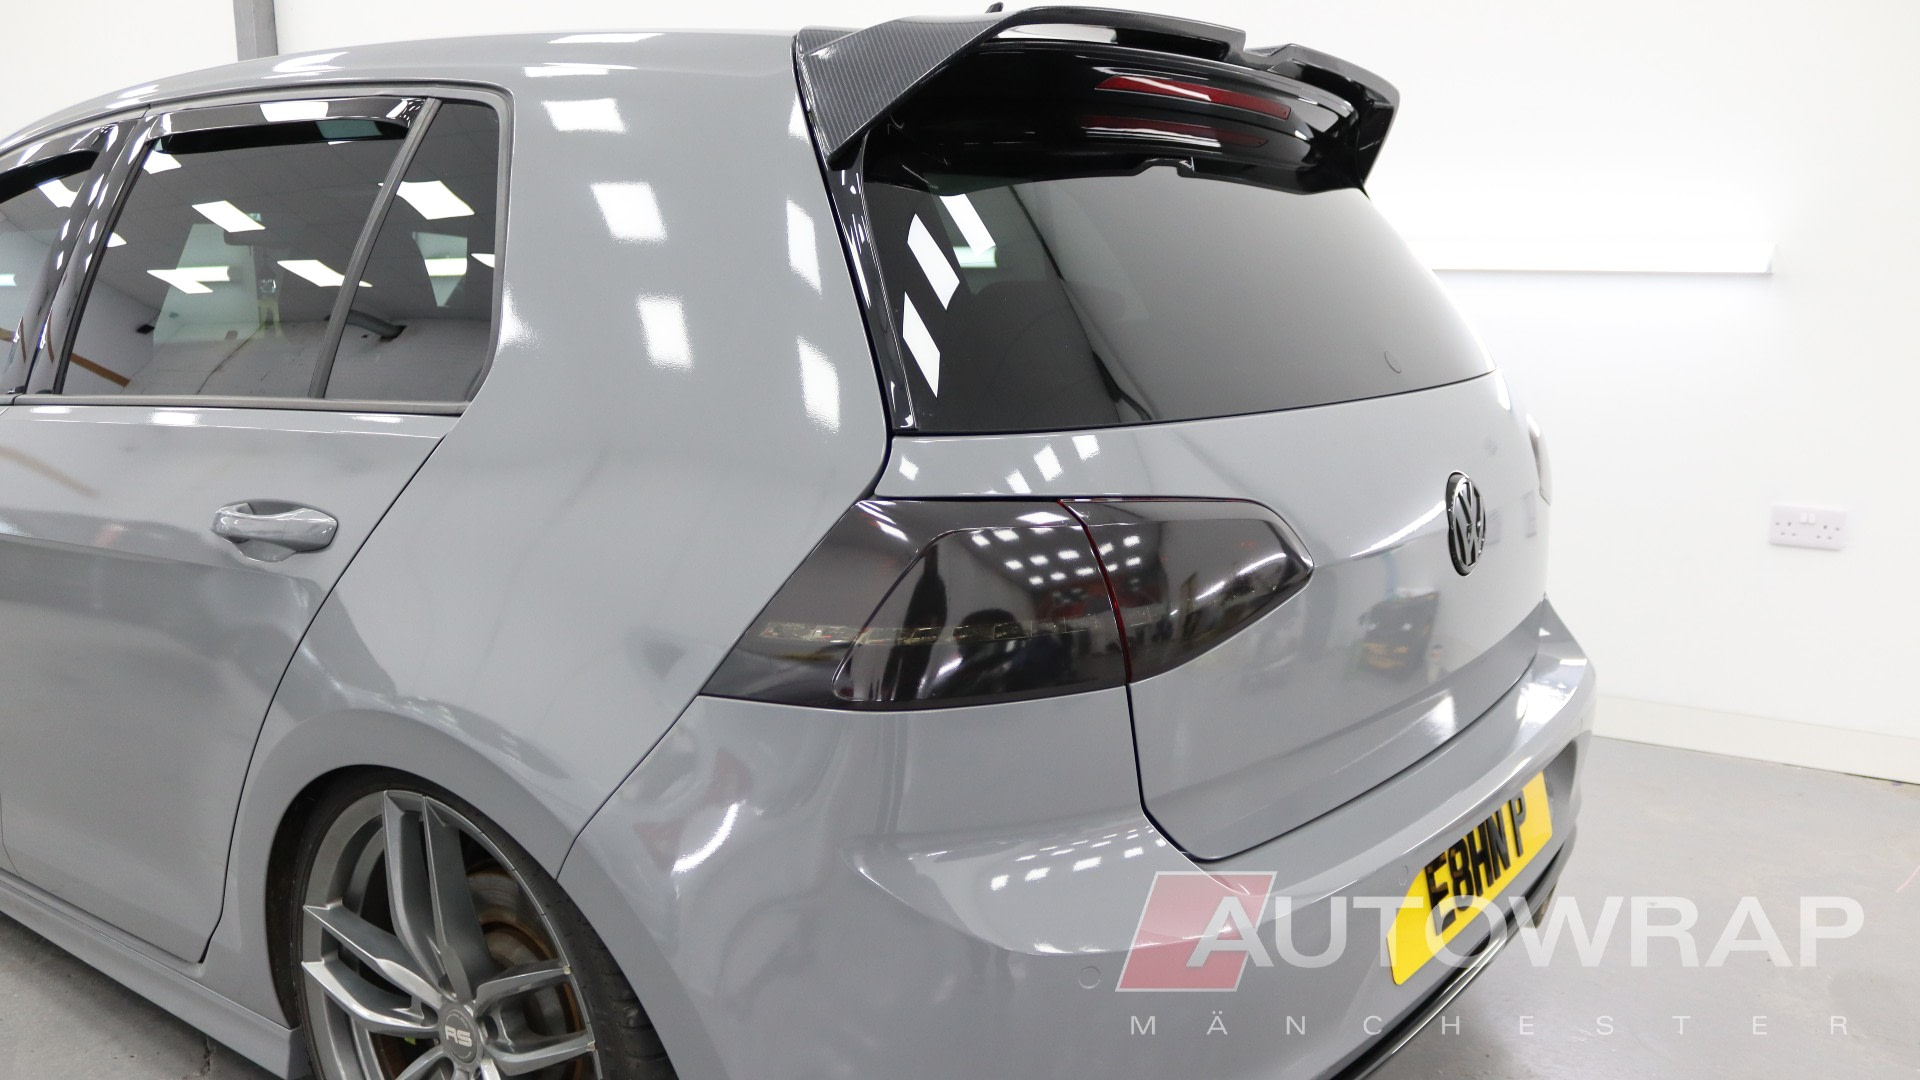 A nardo grey VW Golf with a dark tint on the rear windows and lights. It is sat in a workshop, tilted towards the camera.